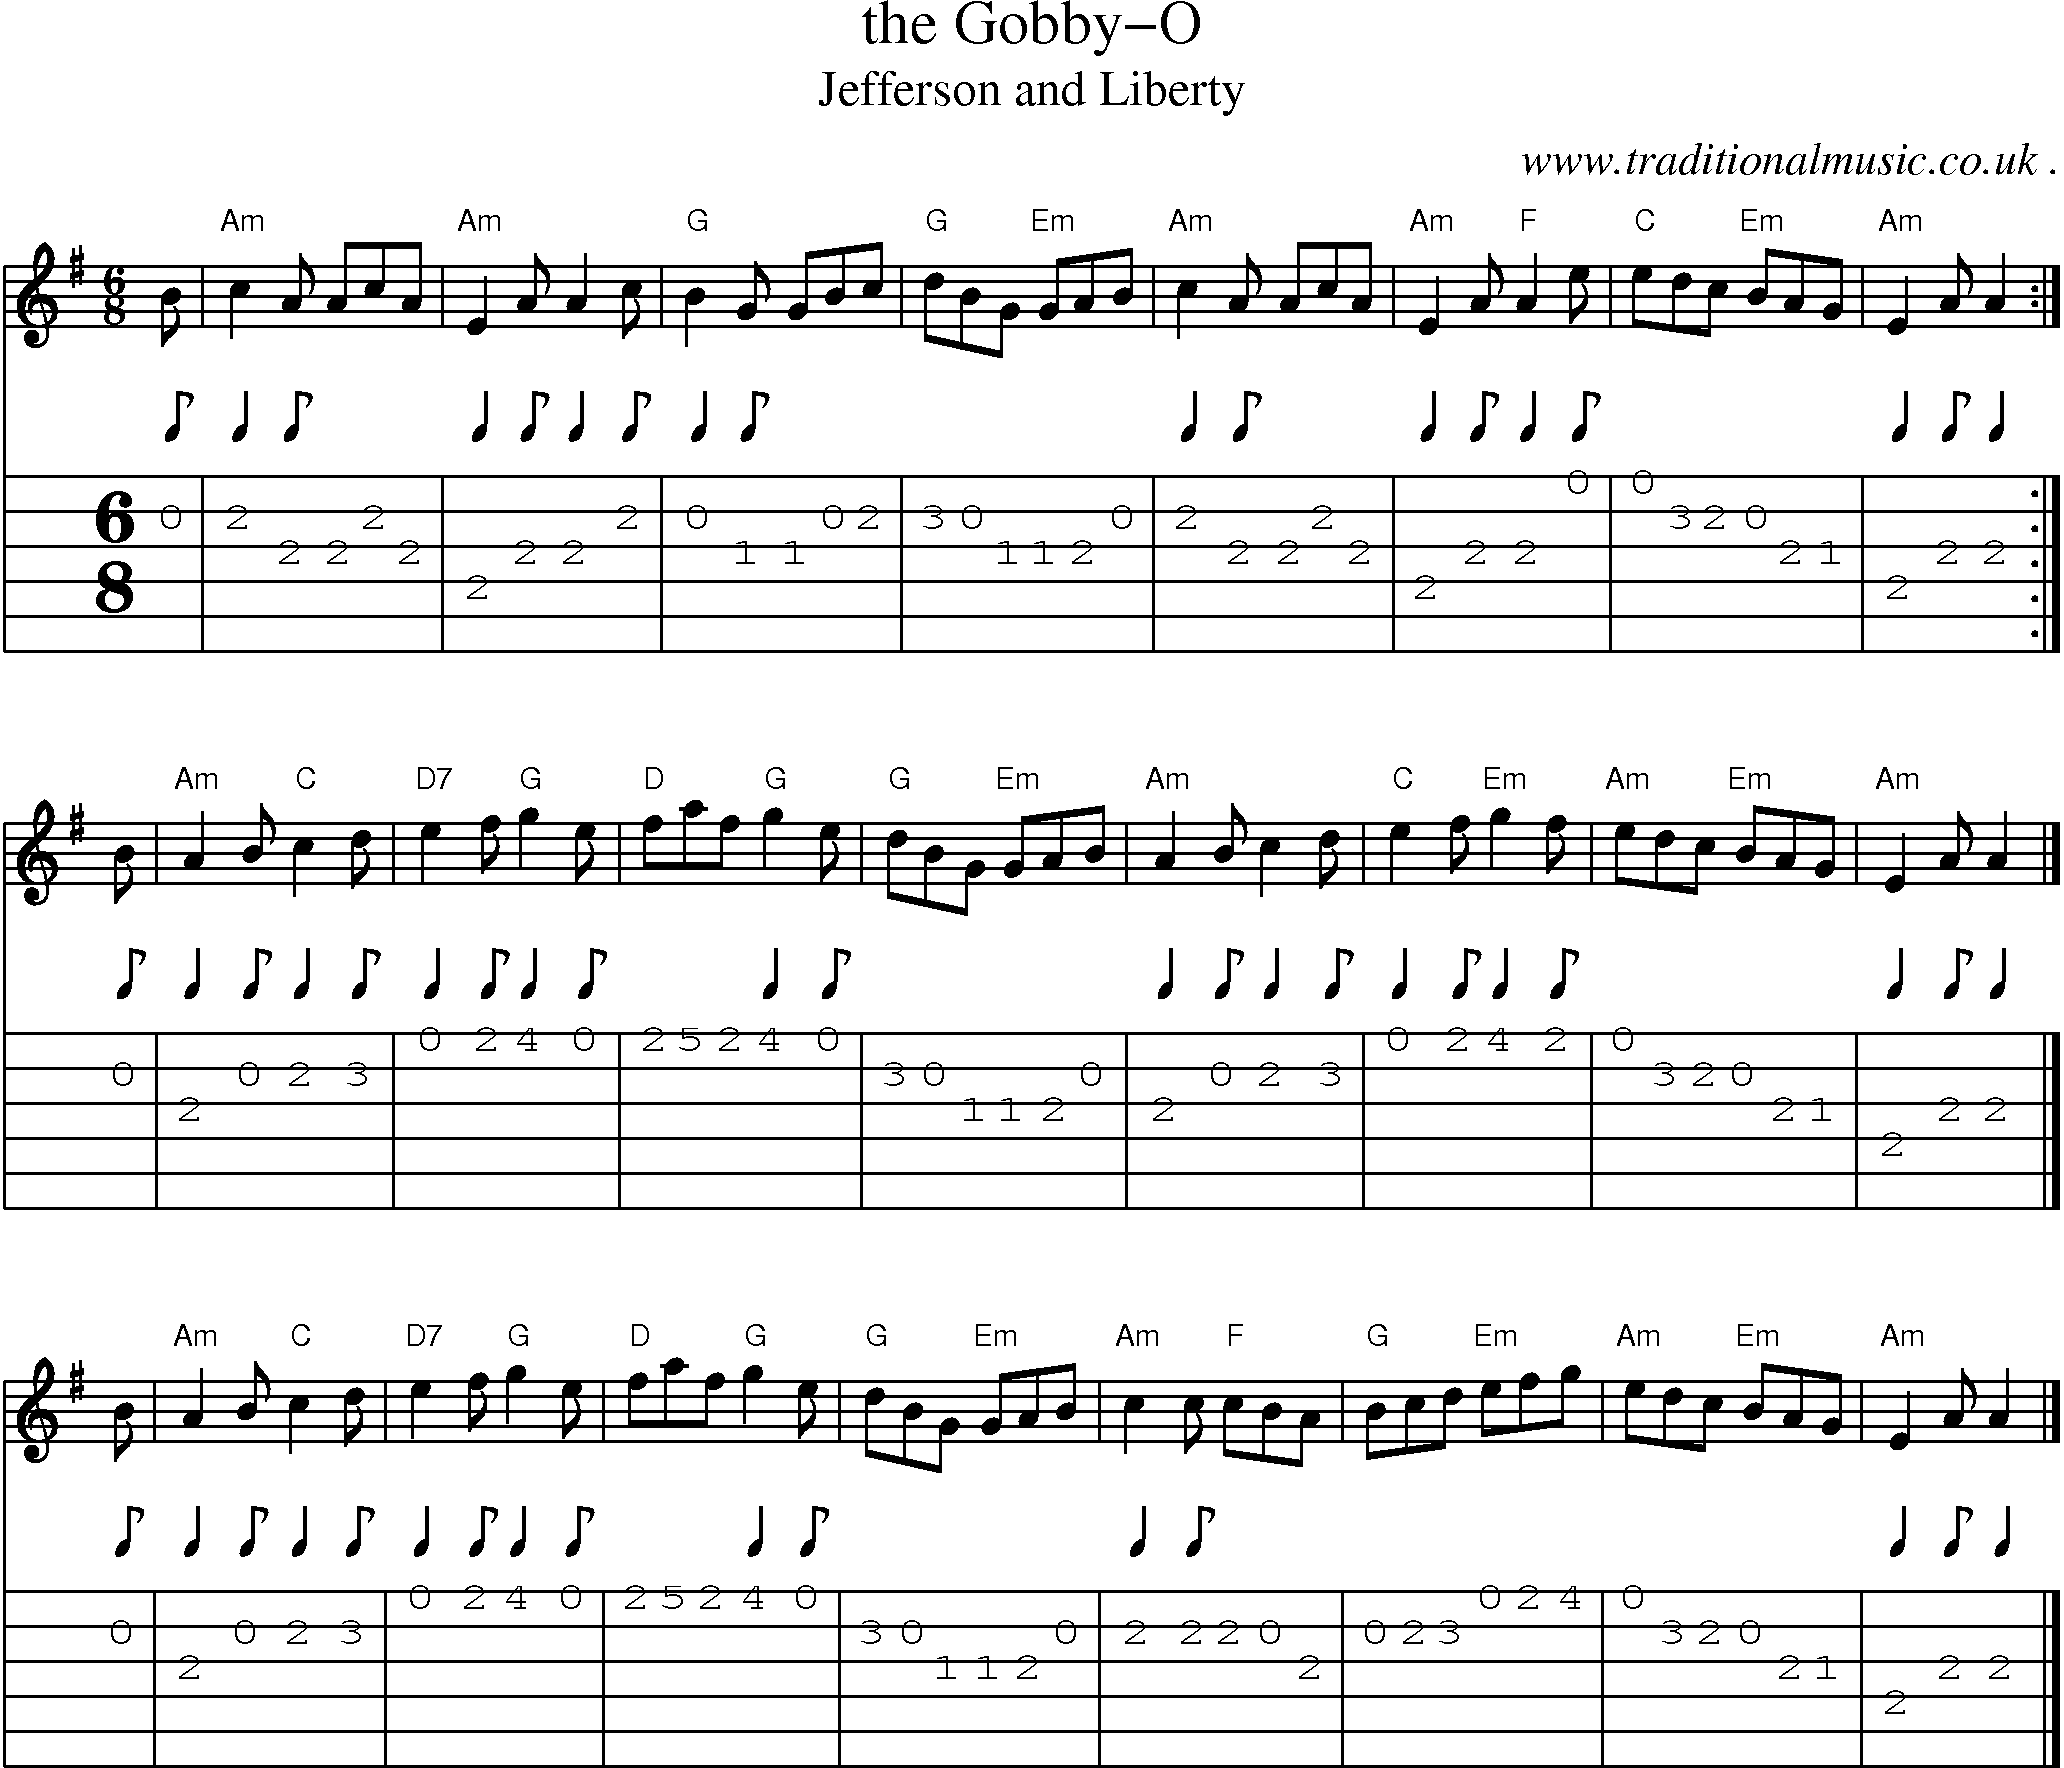 Sheet-music  score, Chords and Guitar Tabs for The Gobby-o